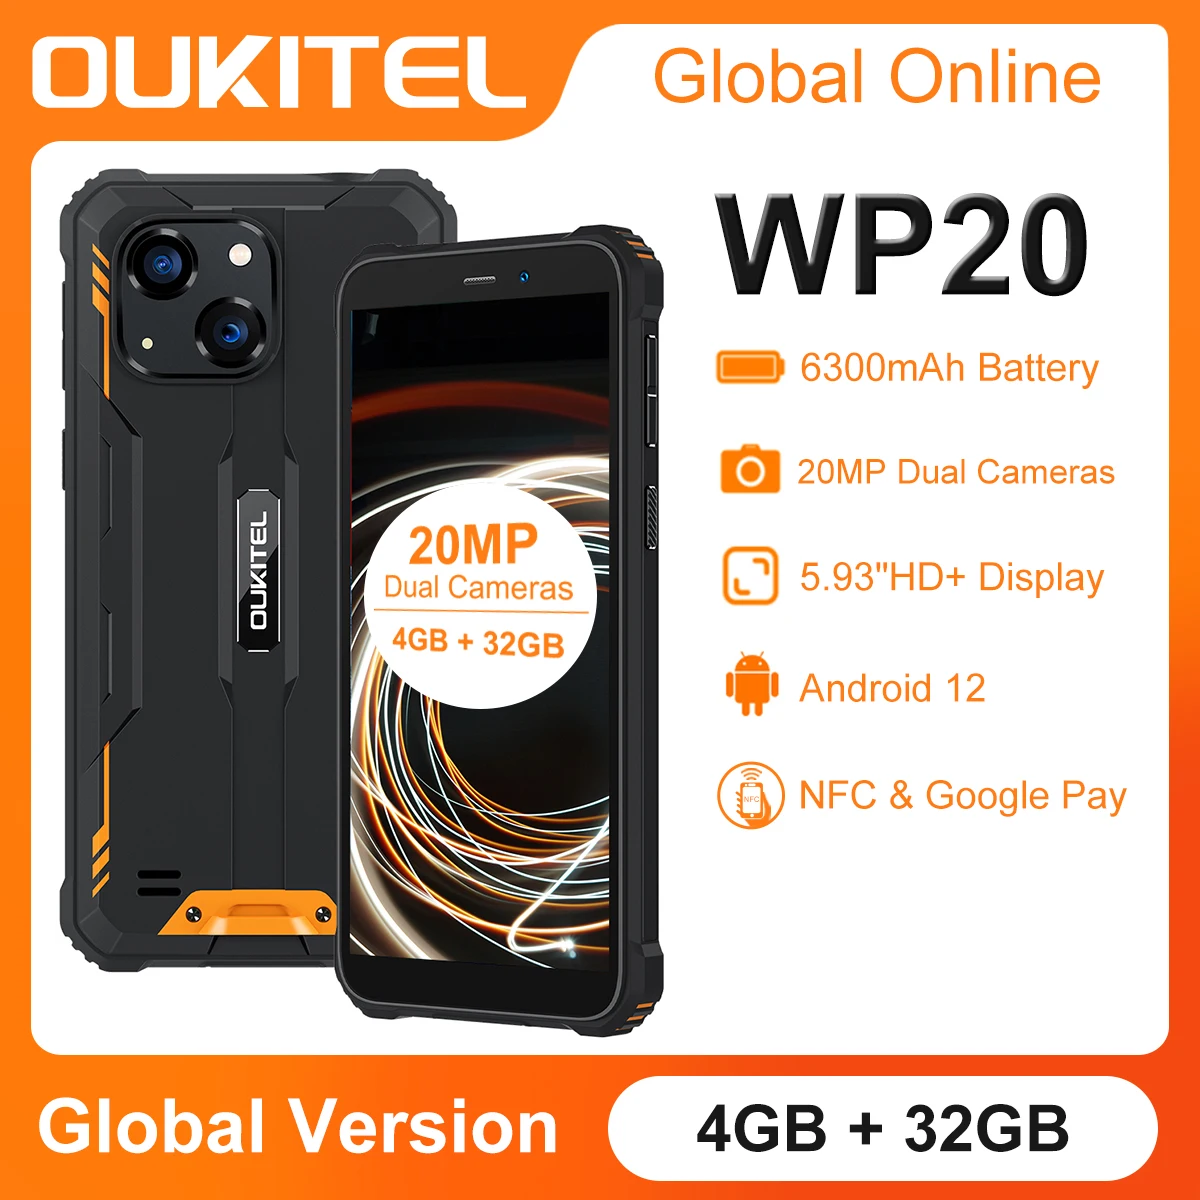 OUKITEL WP20 Rugged Smartphone 5.93'' HD+Display 4G+32G 6300 mAh Android 12 IP68&IP69K Quad Core 20MP Cameras Cell Phone